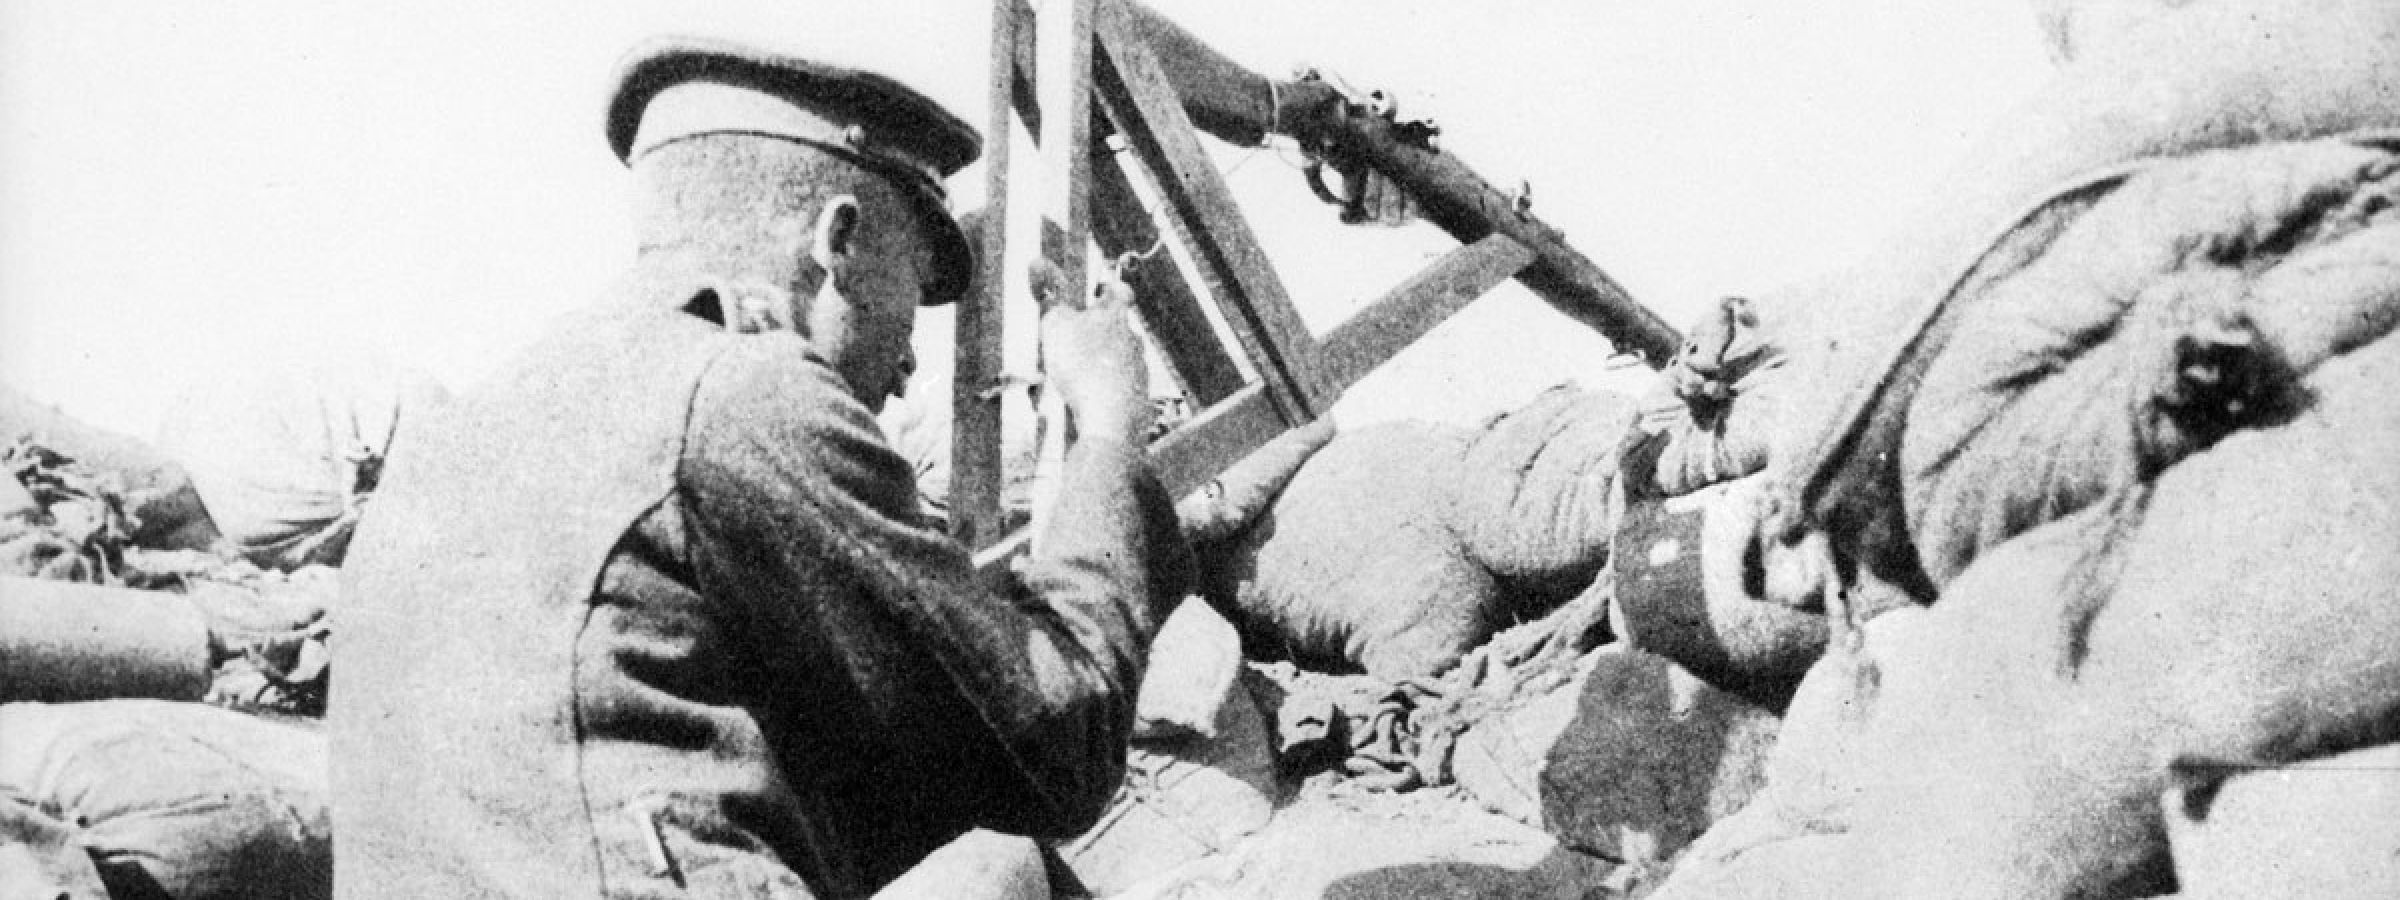 Lieutenant A J Shout sniping with a periscope rifle, 1915.